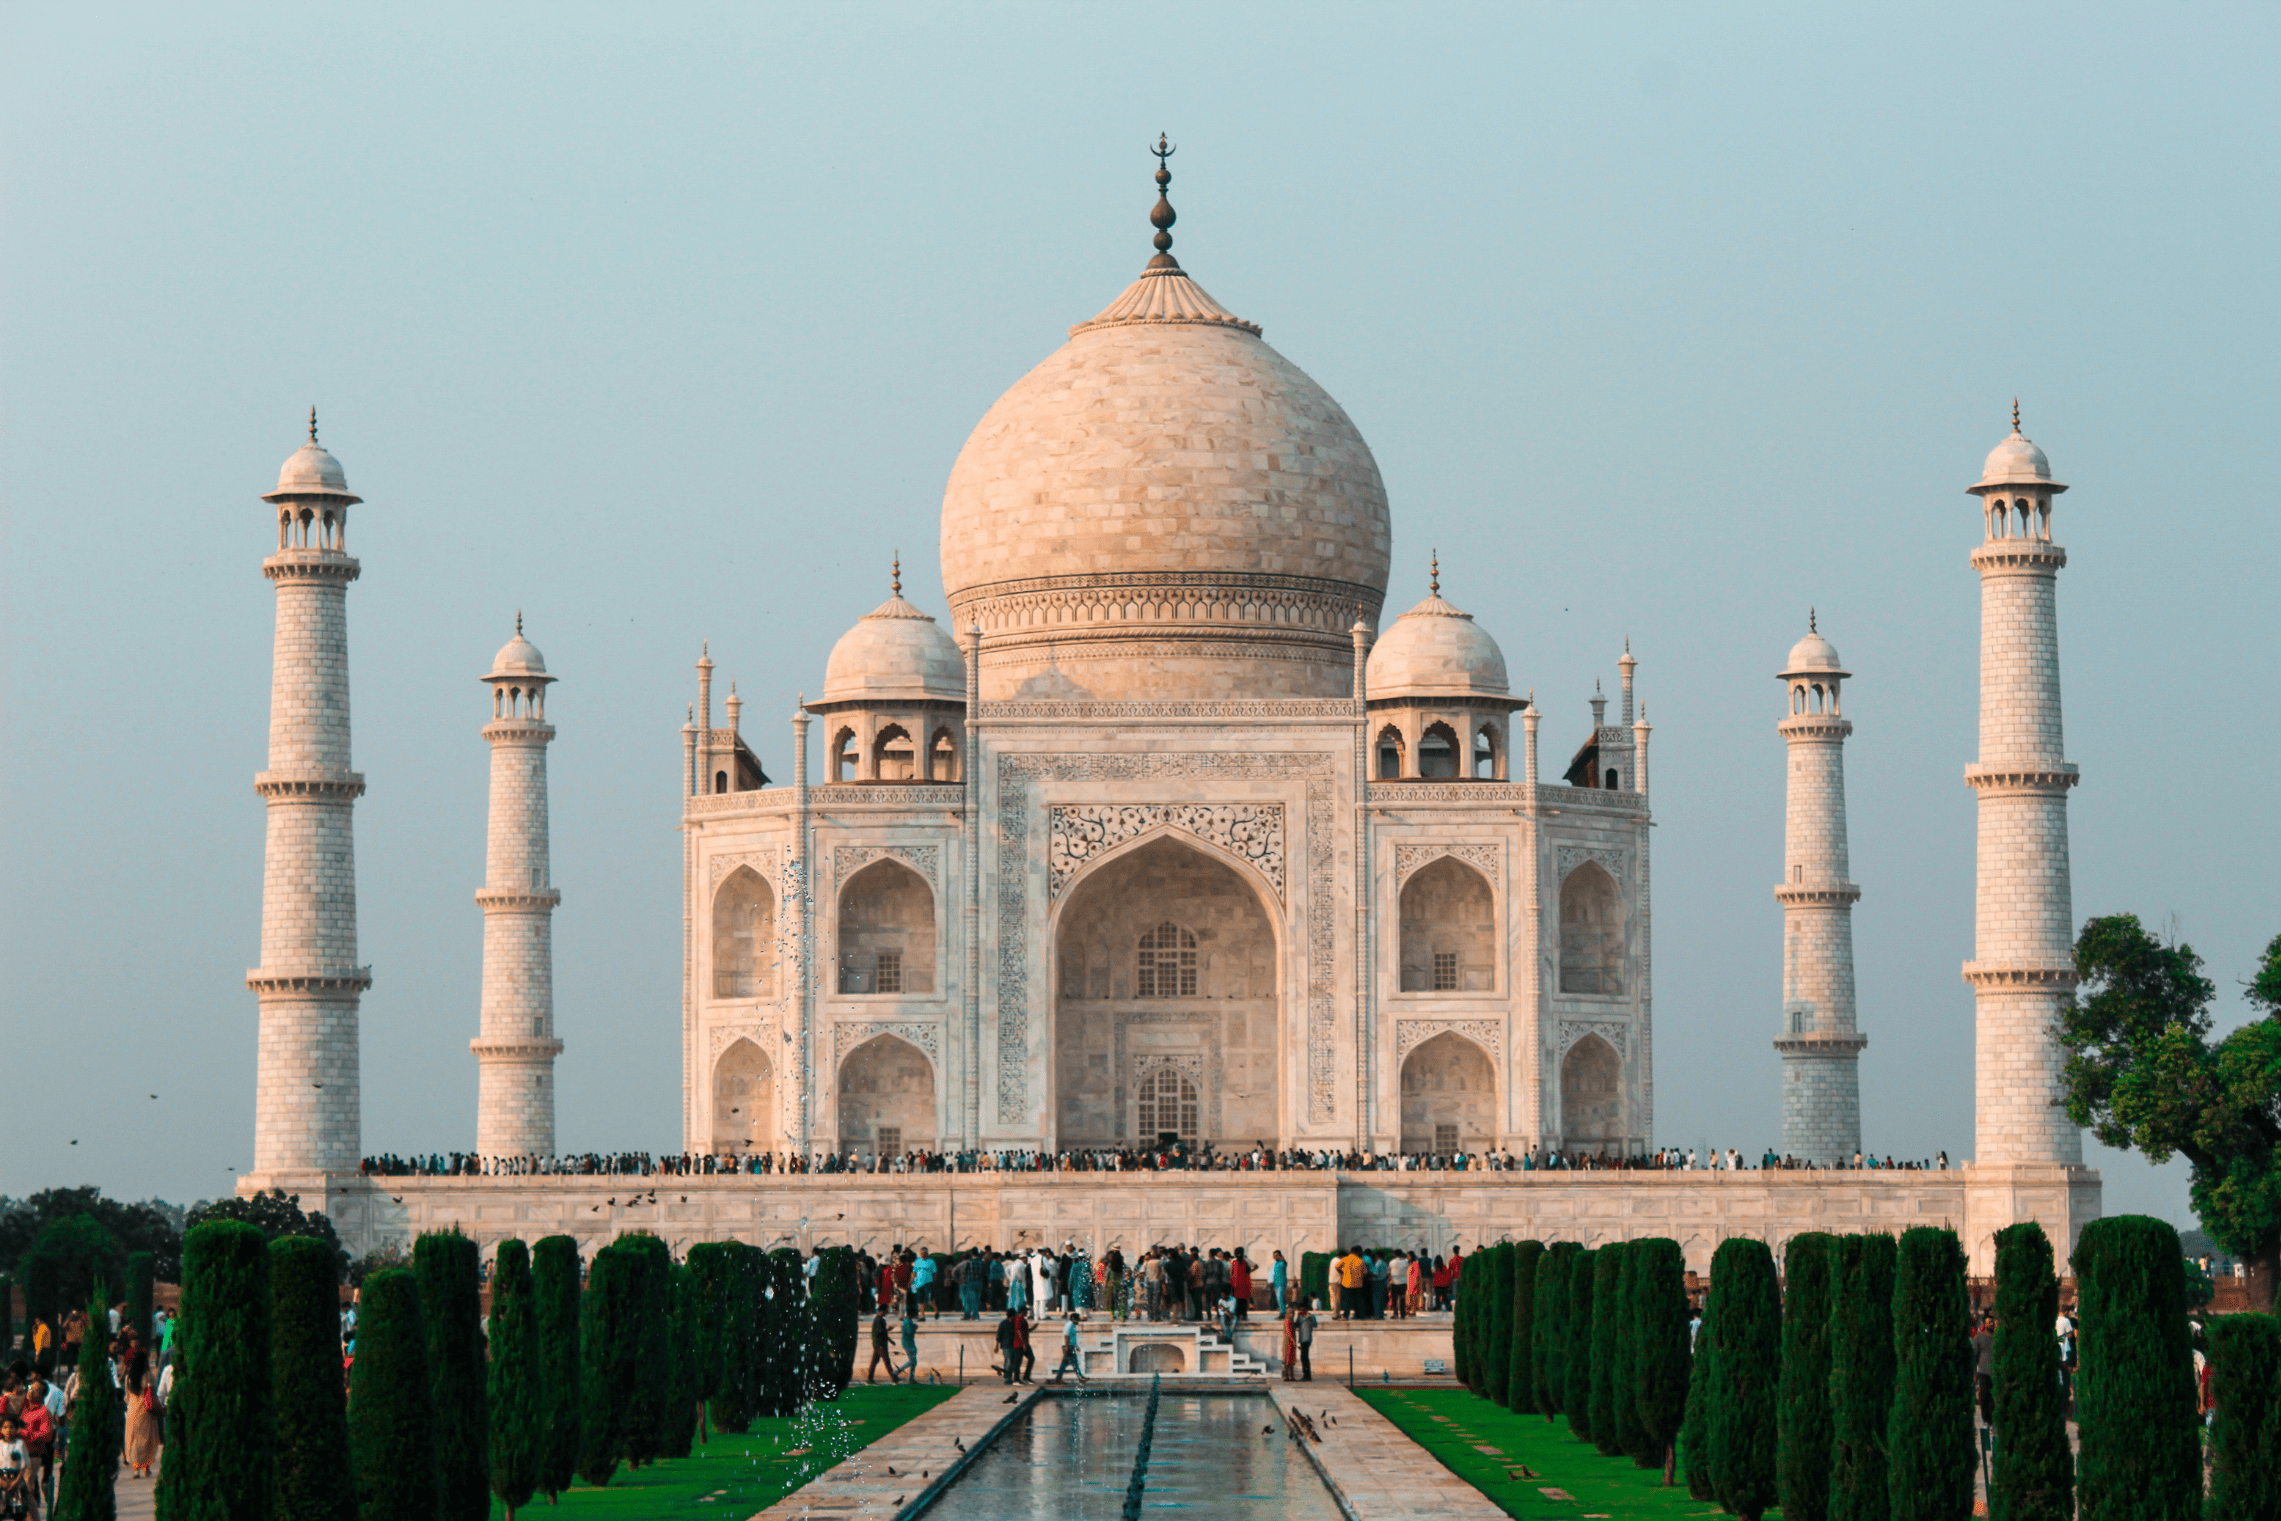 A picture of the Taj Mahal.